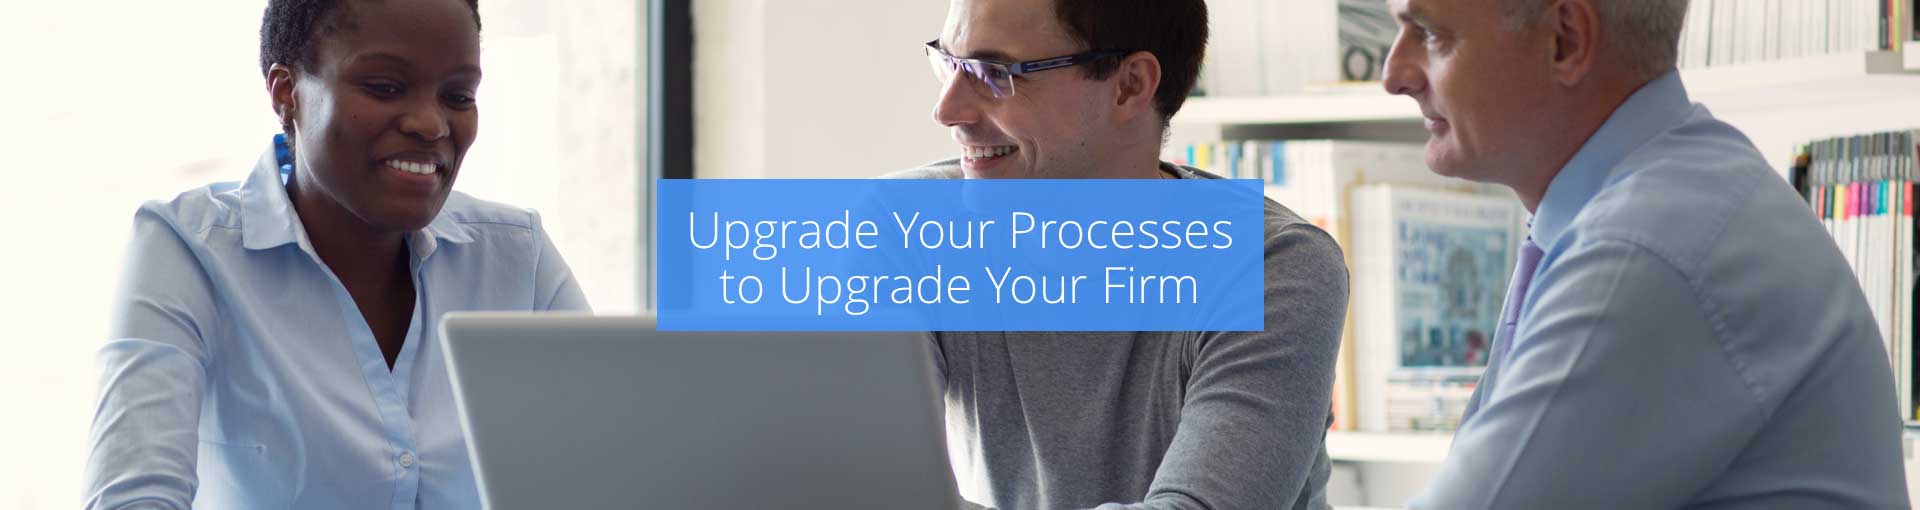 Upgrade Your Processes to Upgrade Your Firm Featured Image